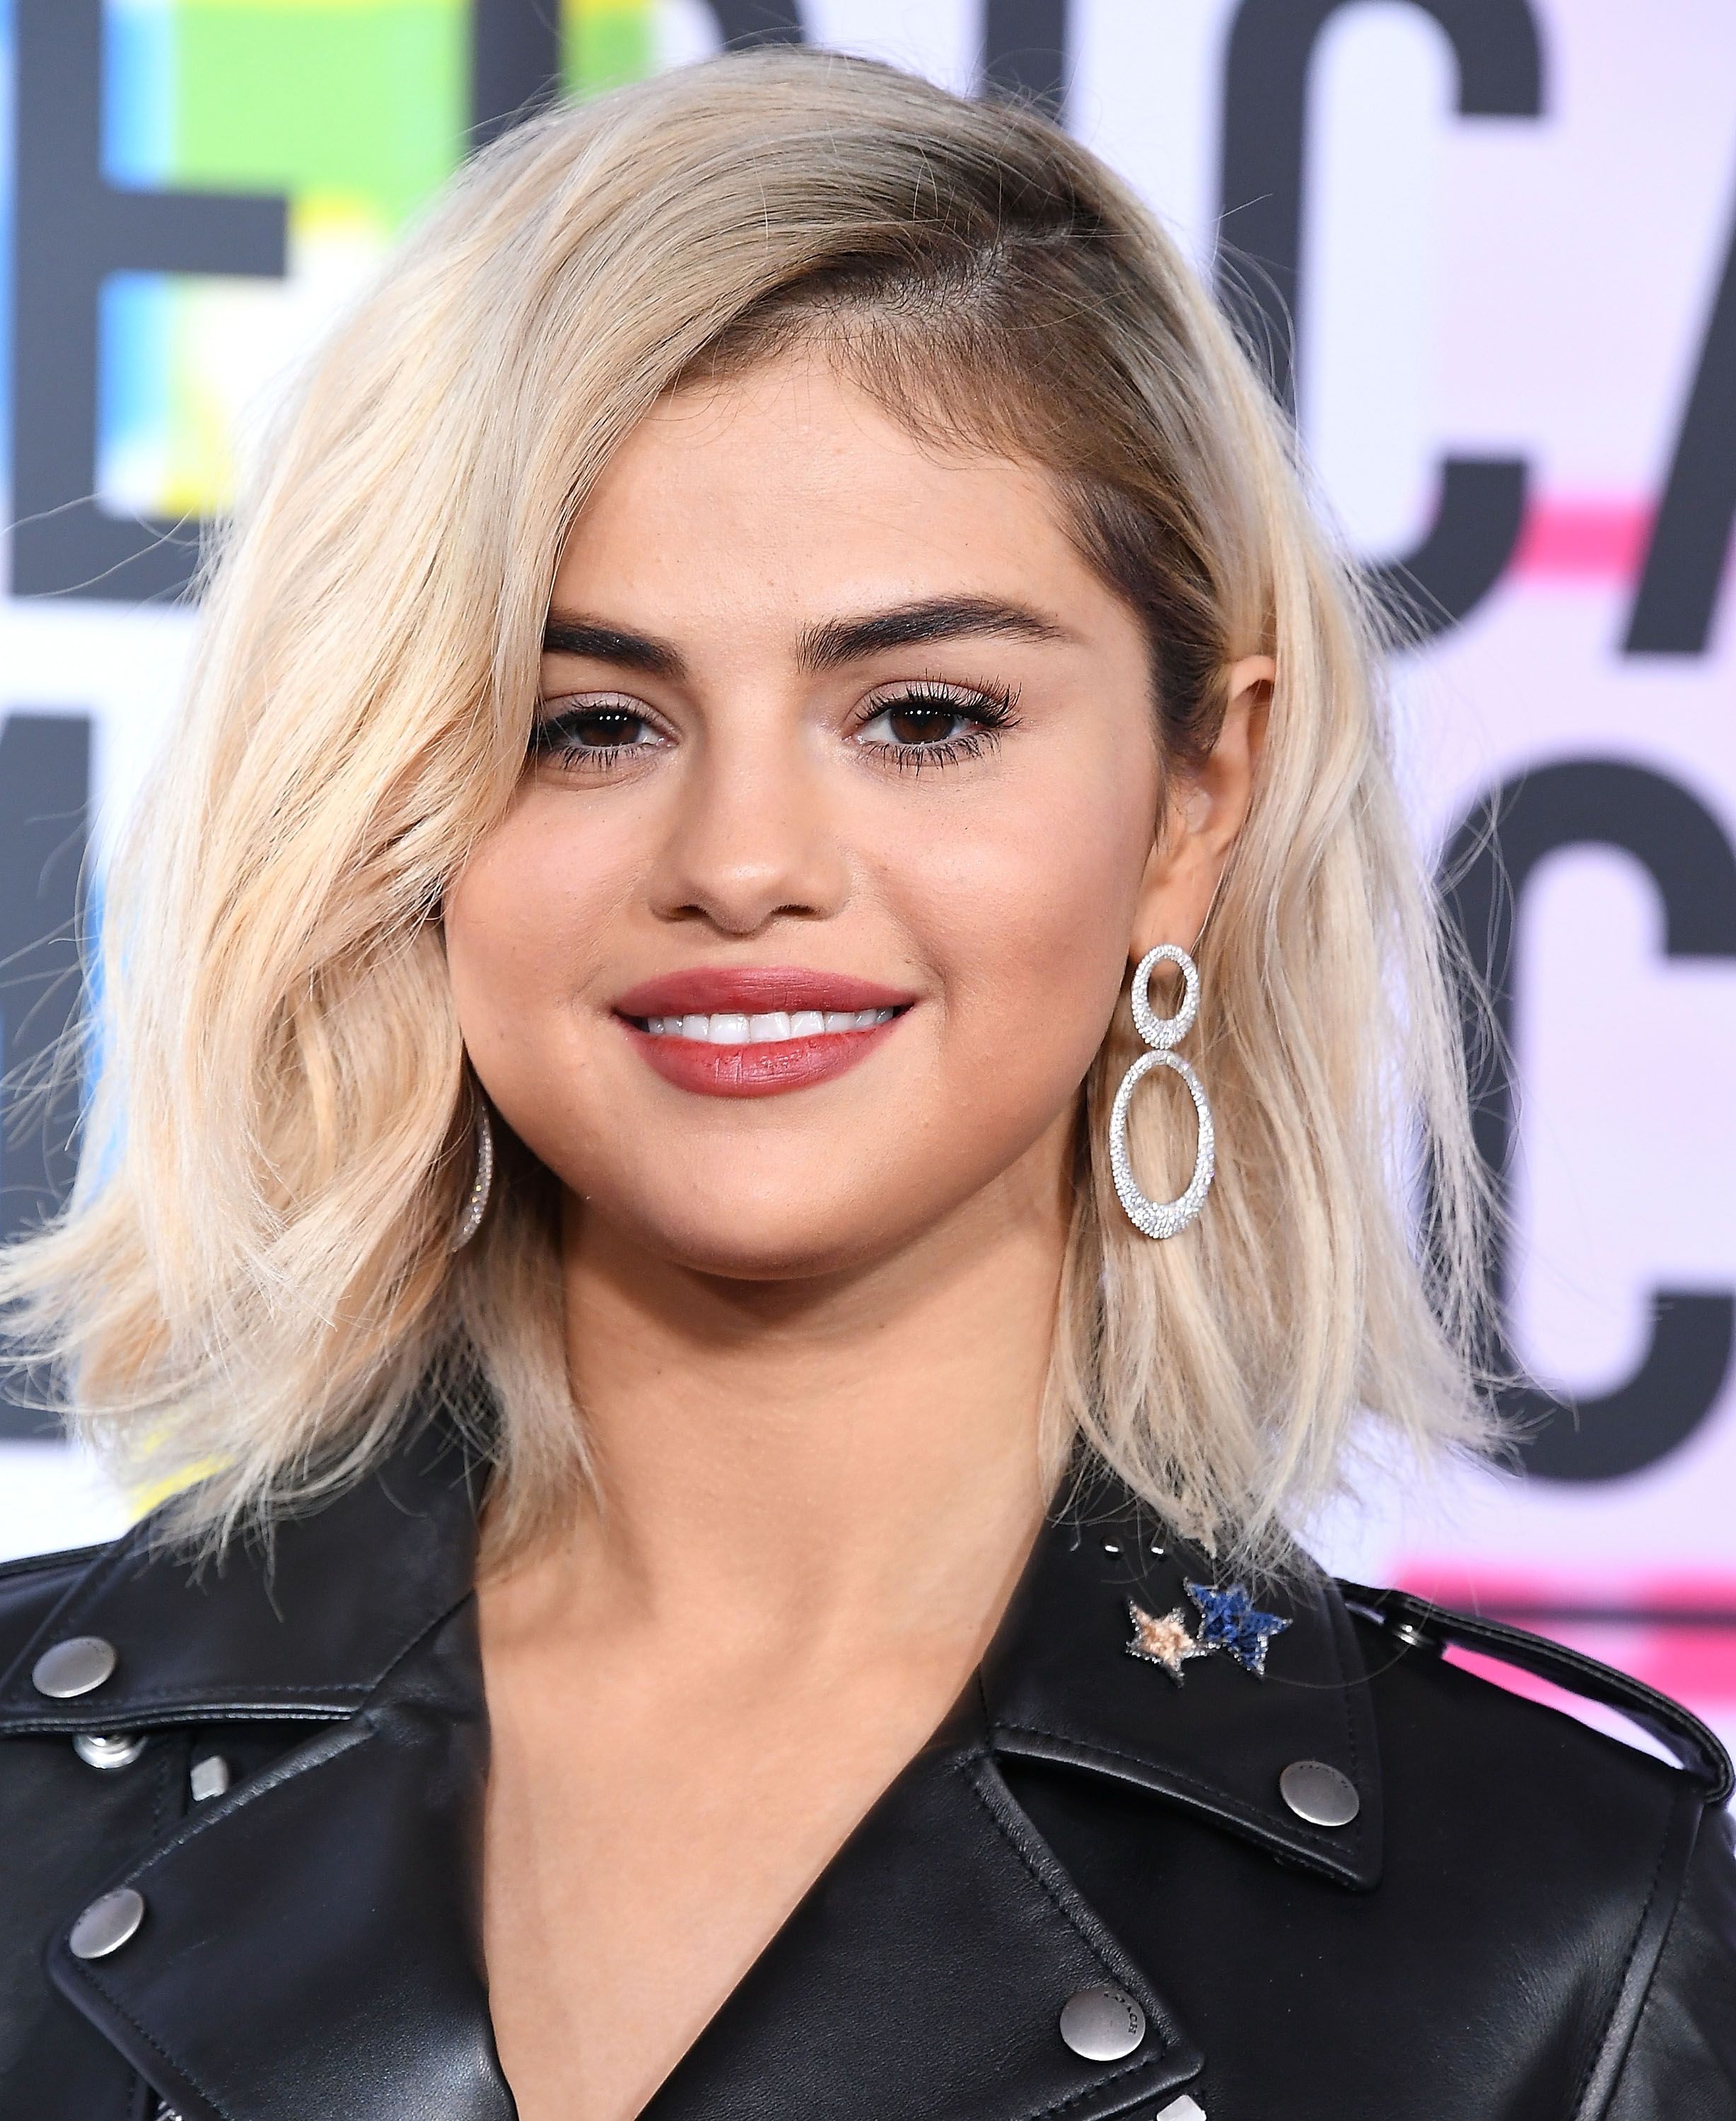 Selena Gomez Is Making Music Again and It's Coming Out This Week